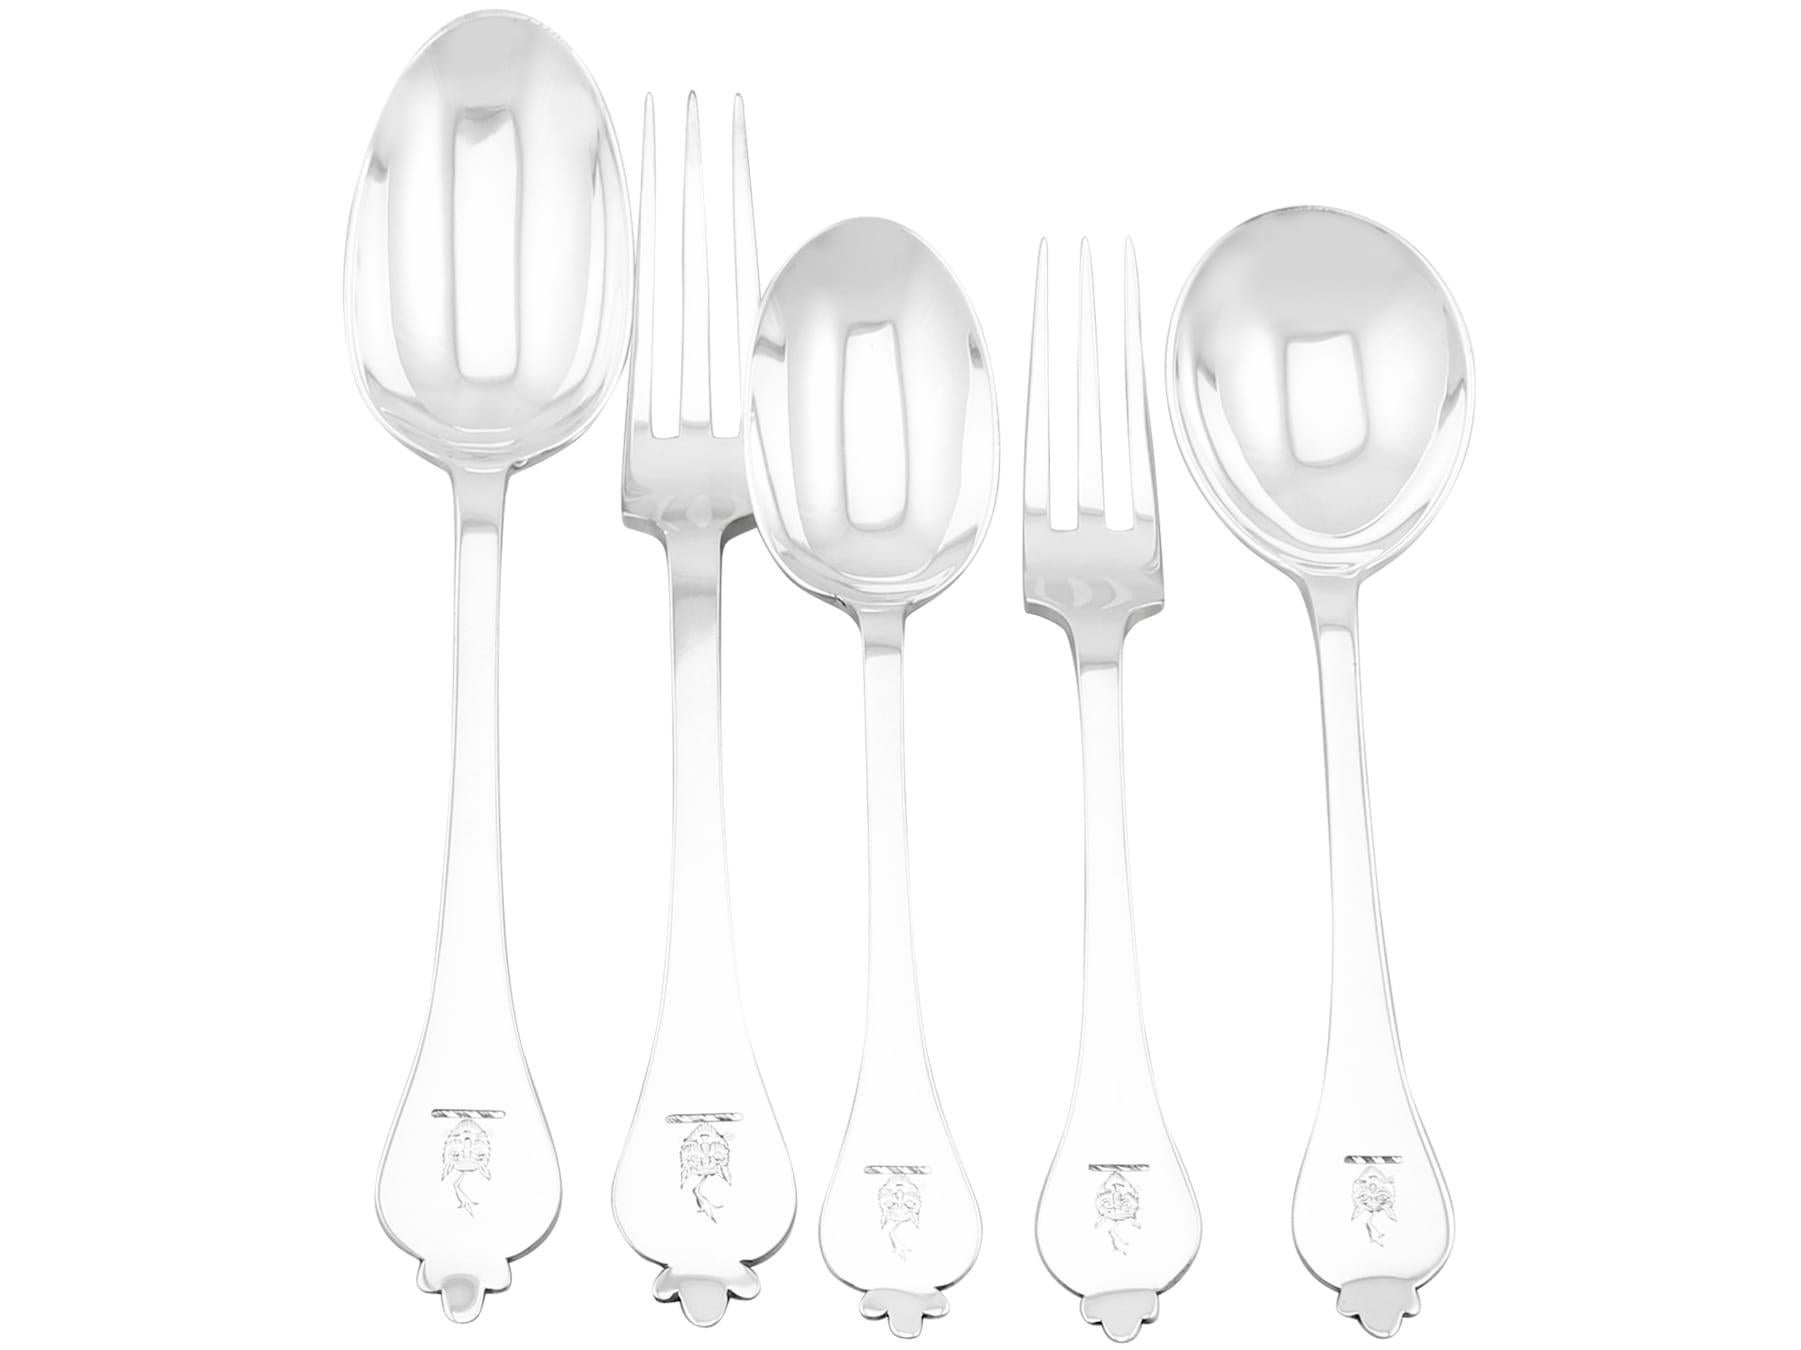 An exceptional, fine and impressive antique and vintage English sterling silver Trefid style pattern flatware service for 12 persons; an addition to our antique flatware sets.

The pieces of this exceptional antique and vintage sterling silver